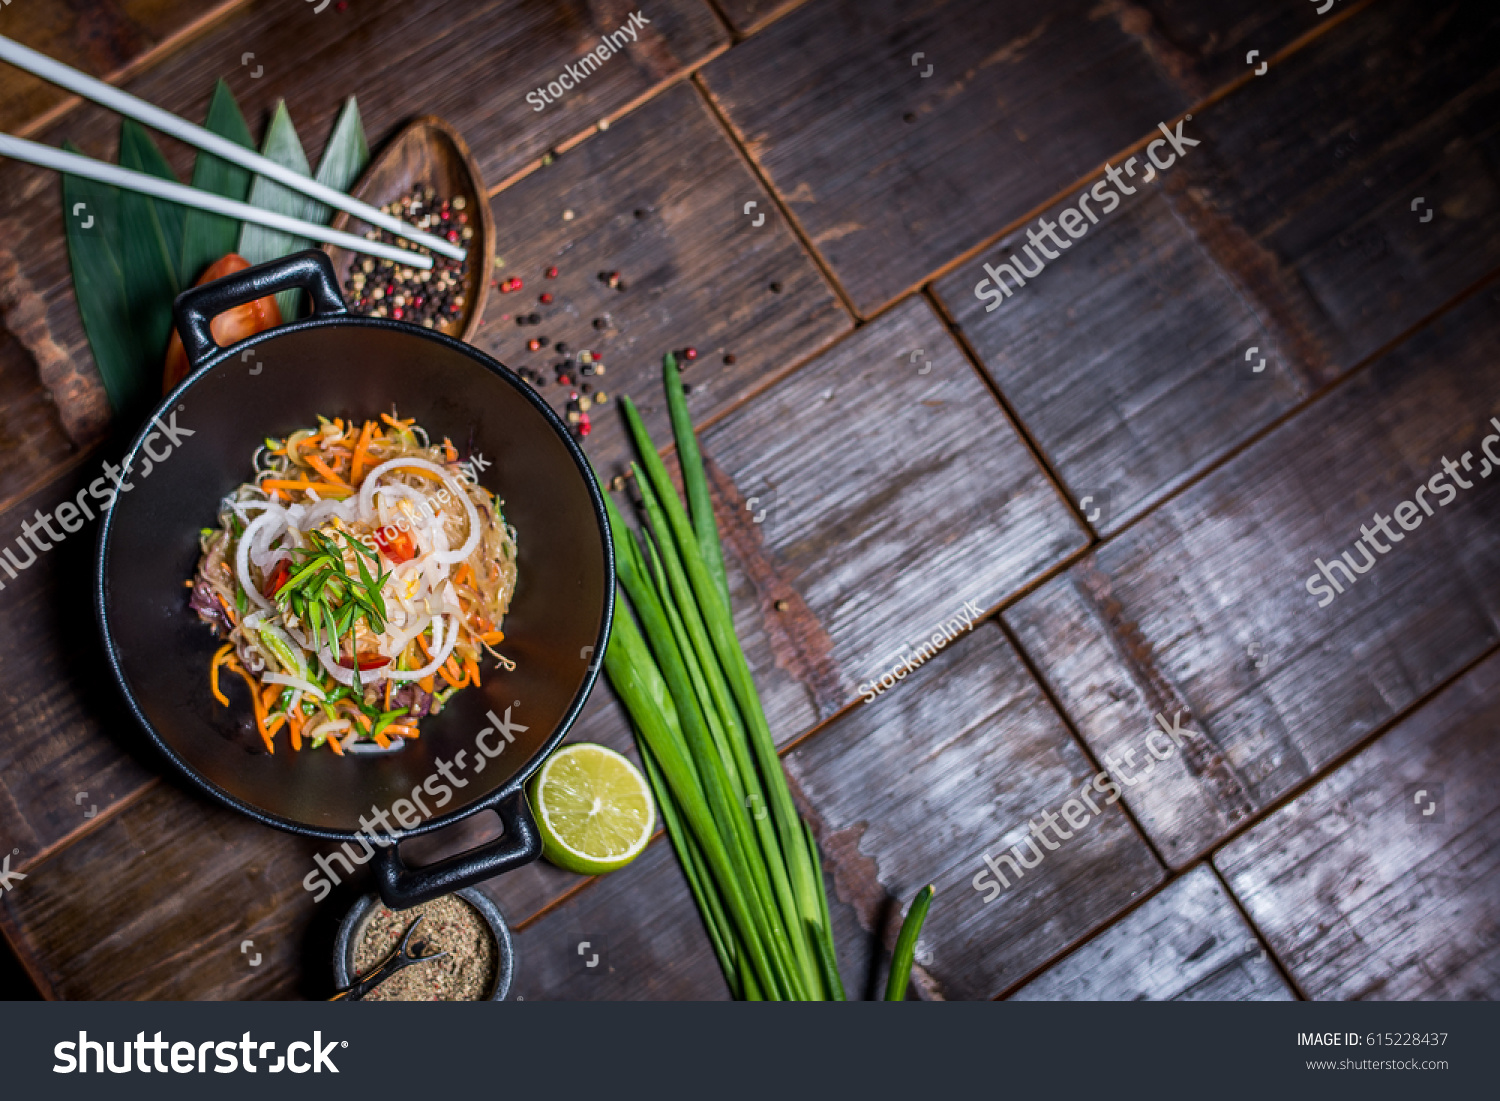 Noodles in bowl on wood table top
 #615228437